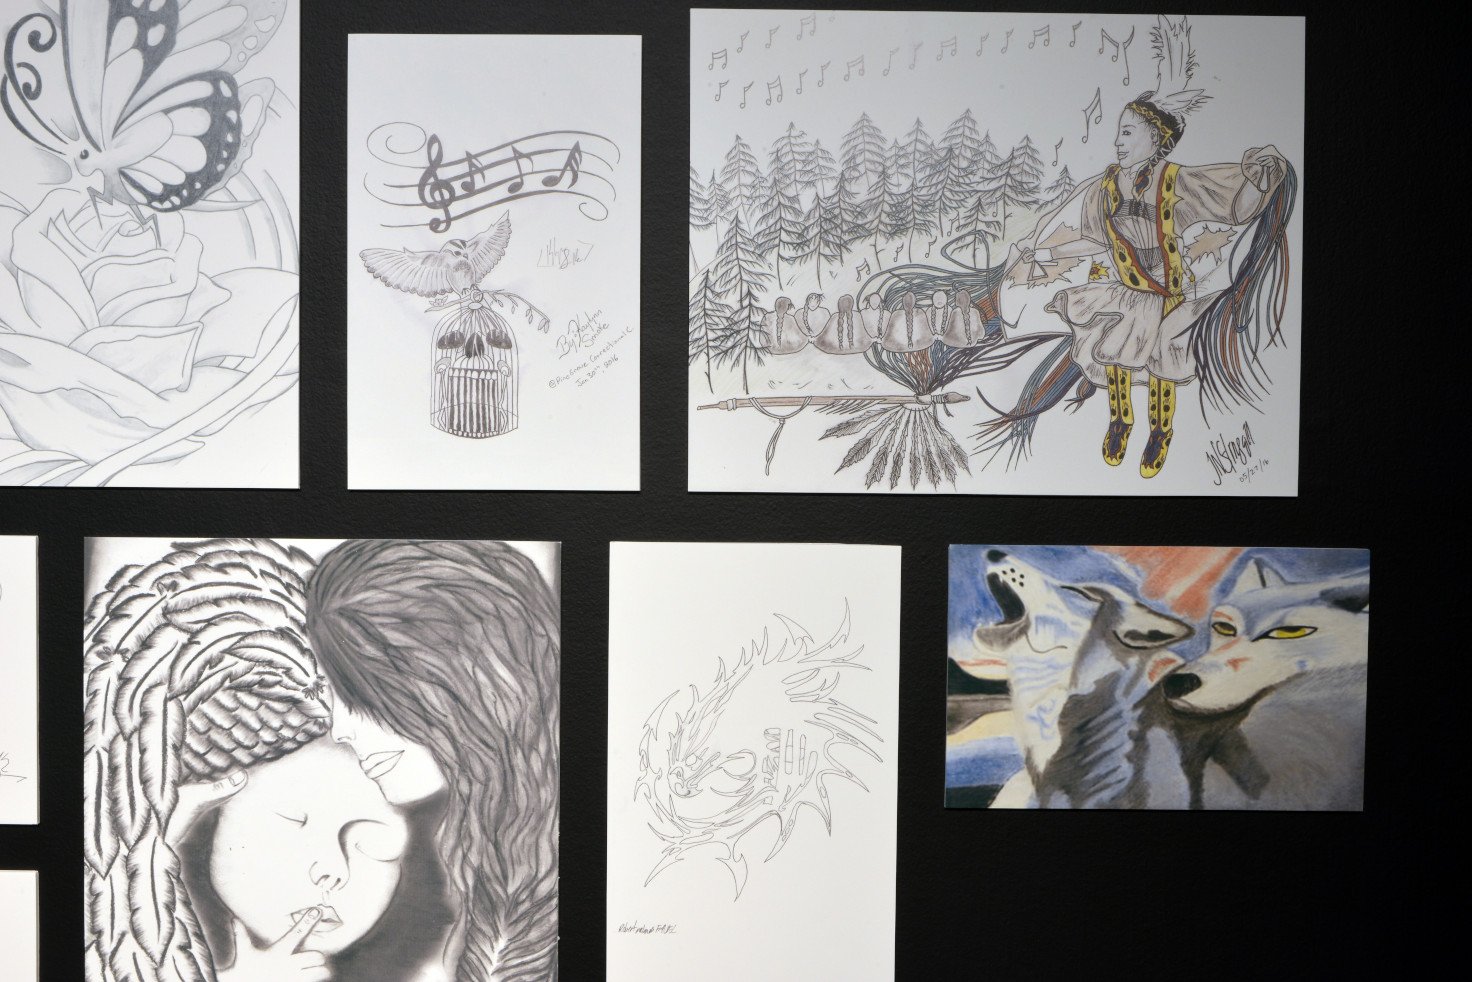  Artwork created by participants of  Why the Caged Bird Sings  workshops. 